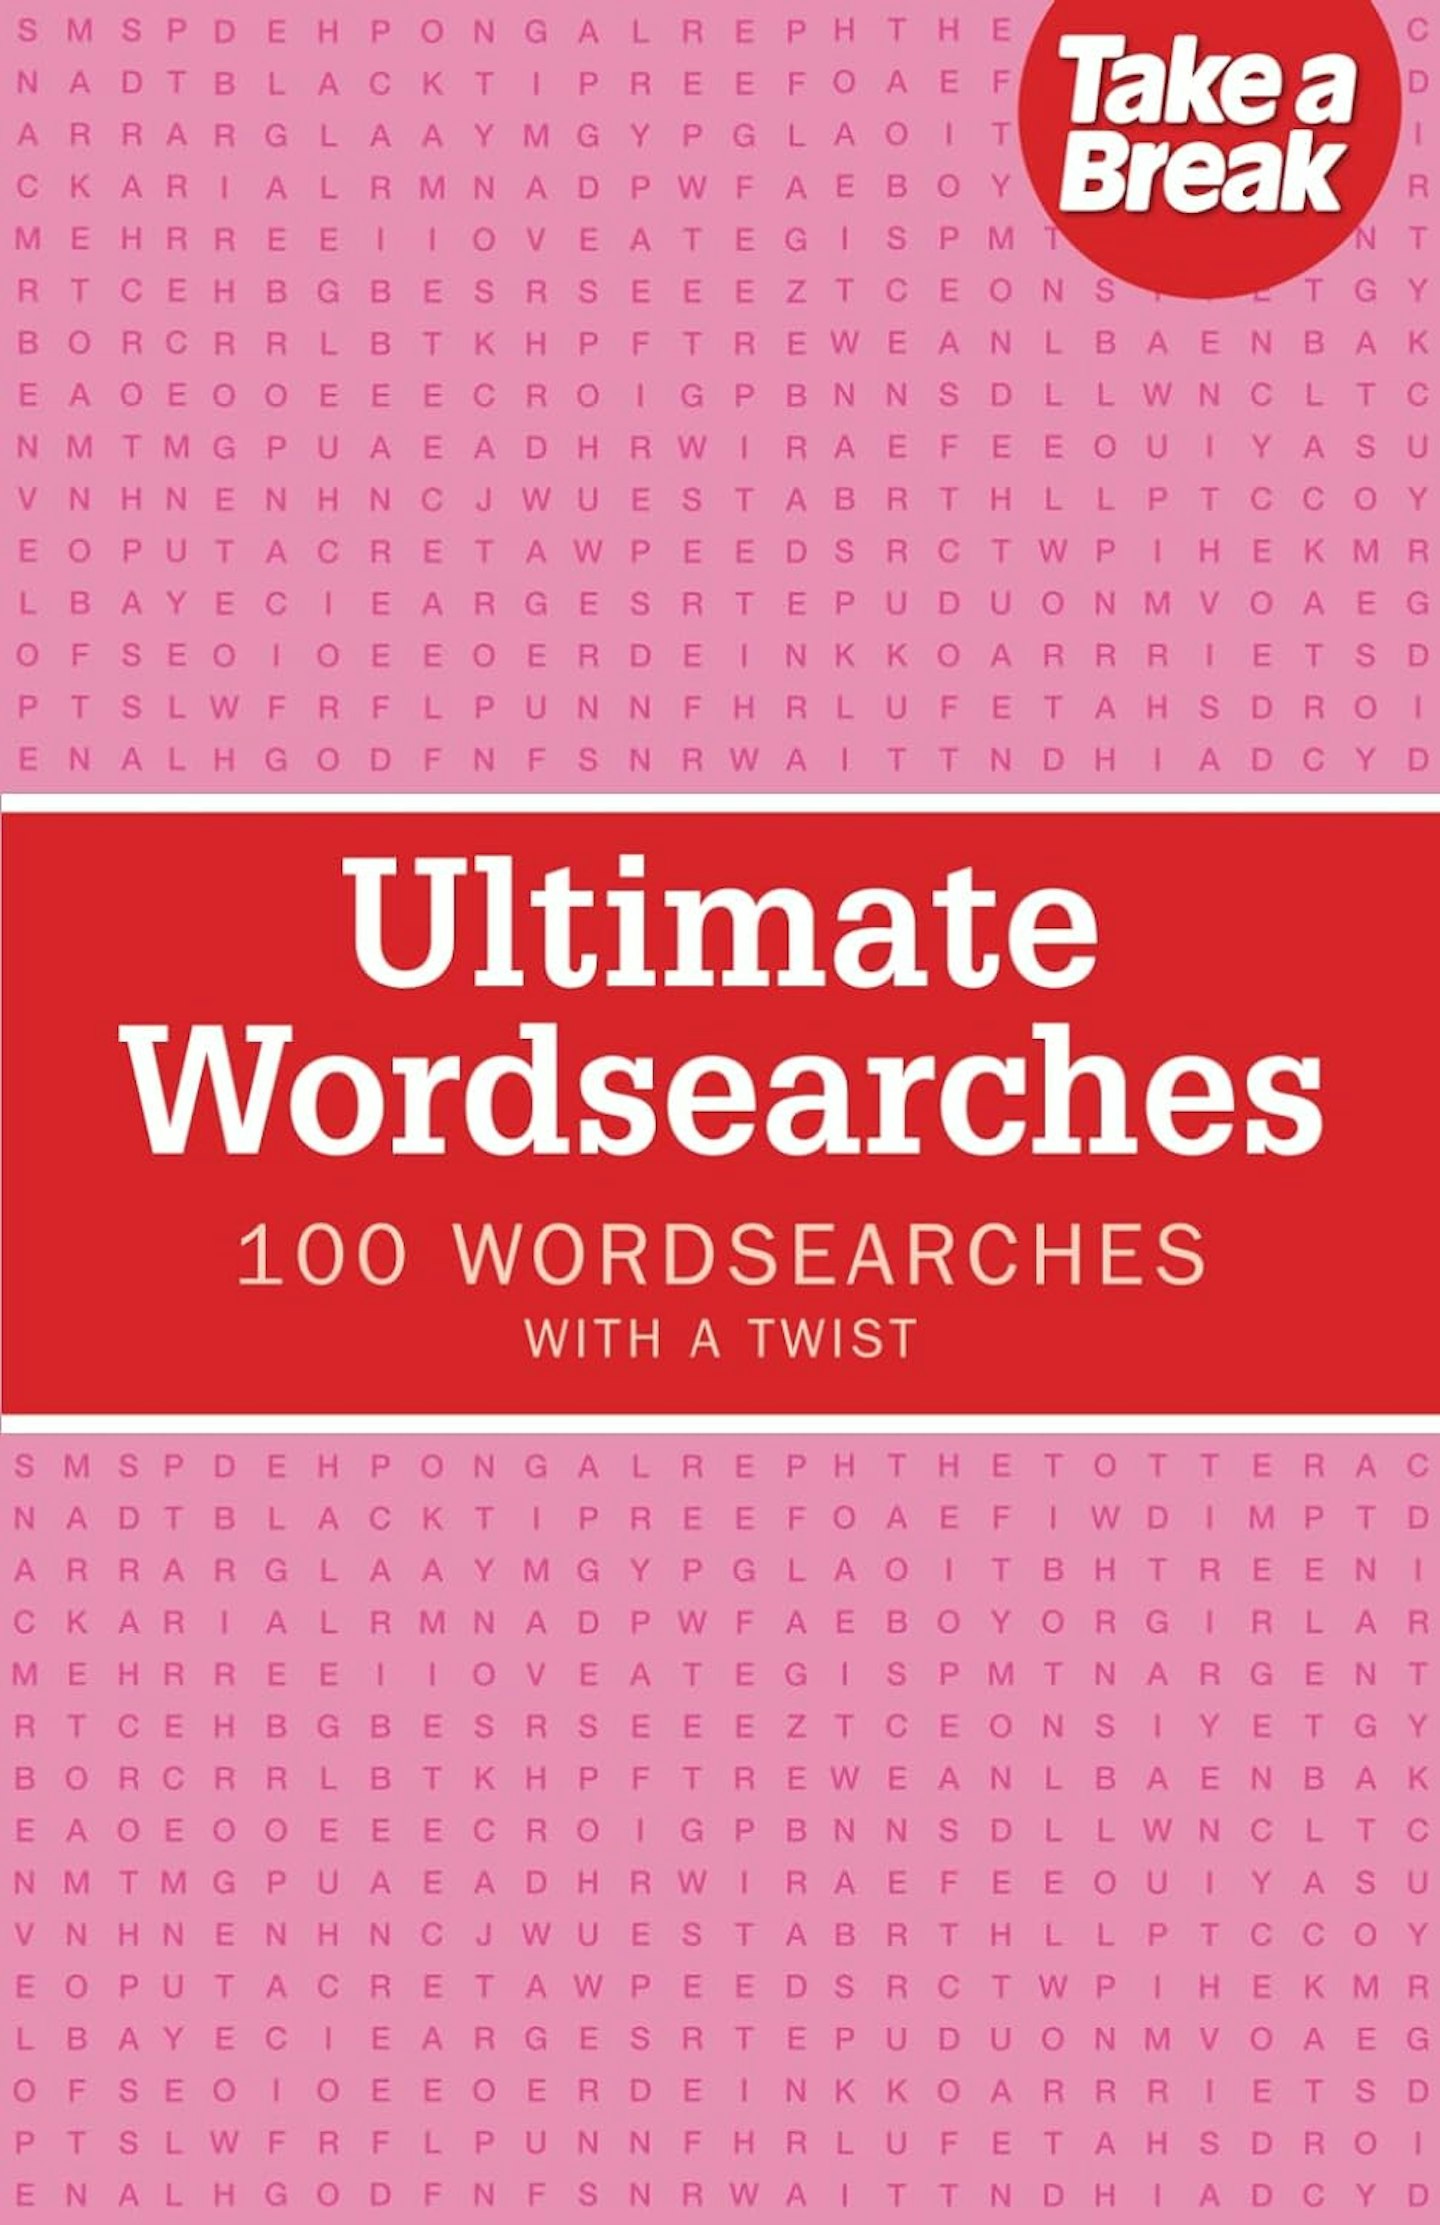 Ultimate Wordsearches book